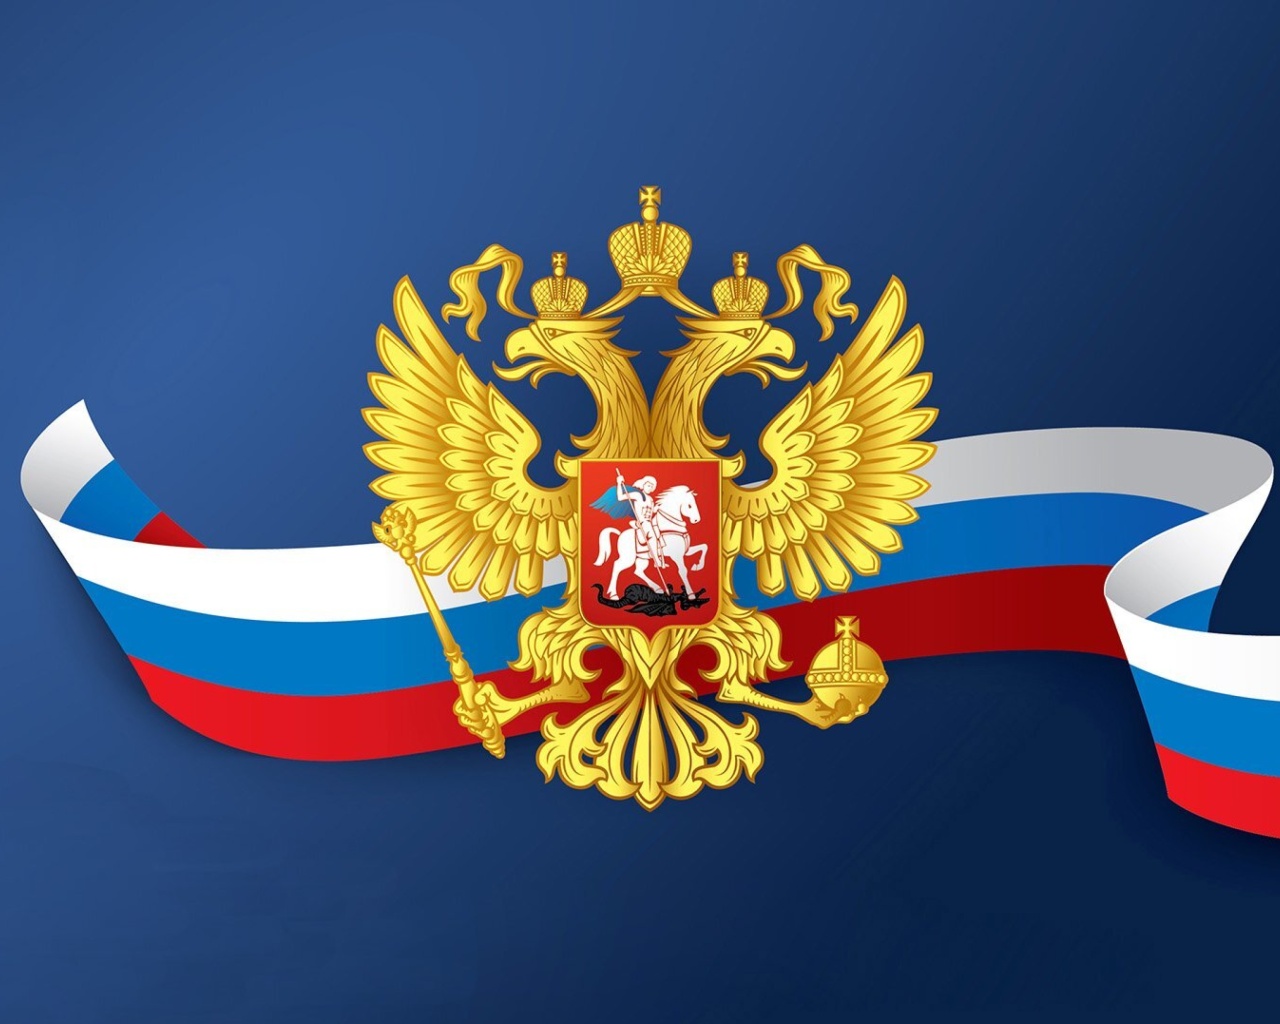 Russian coat of arms and flag screenshot #1 1280x1024